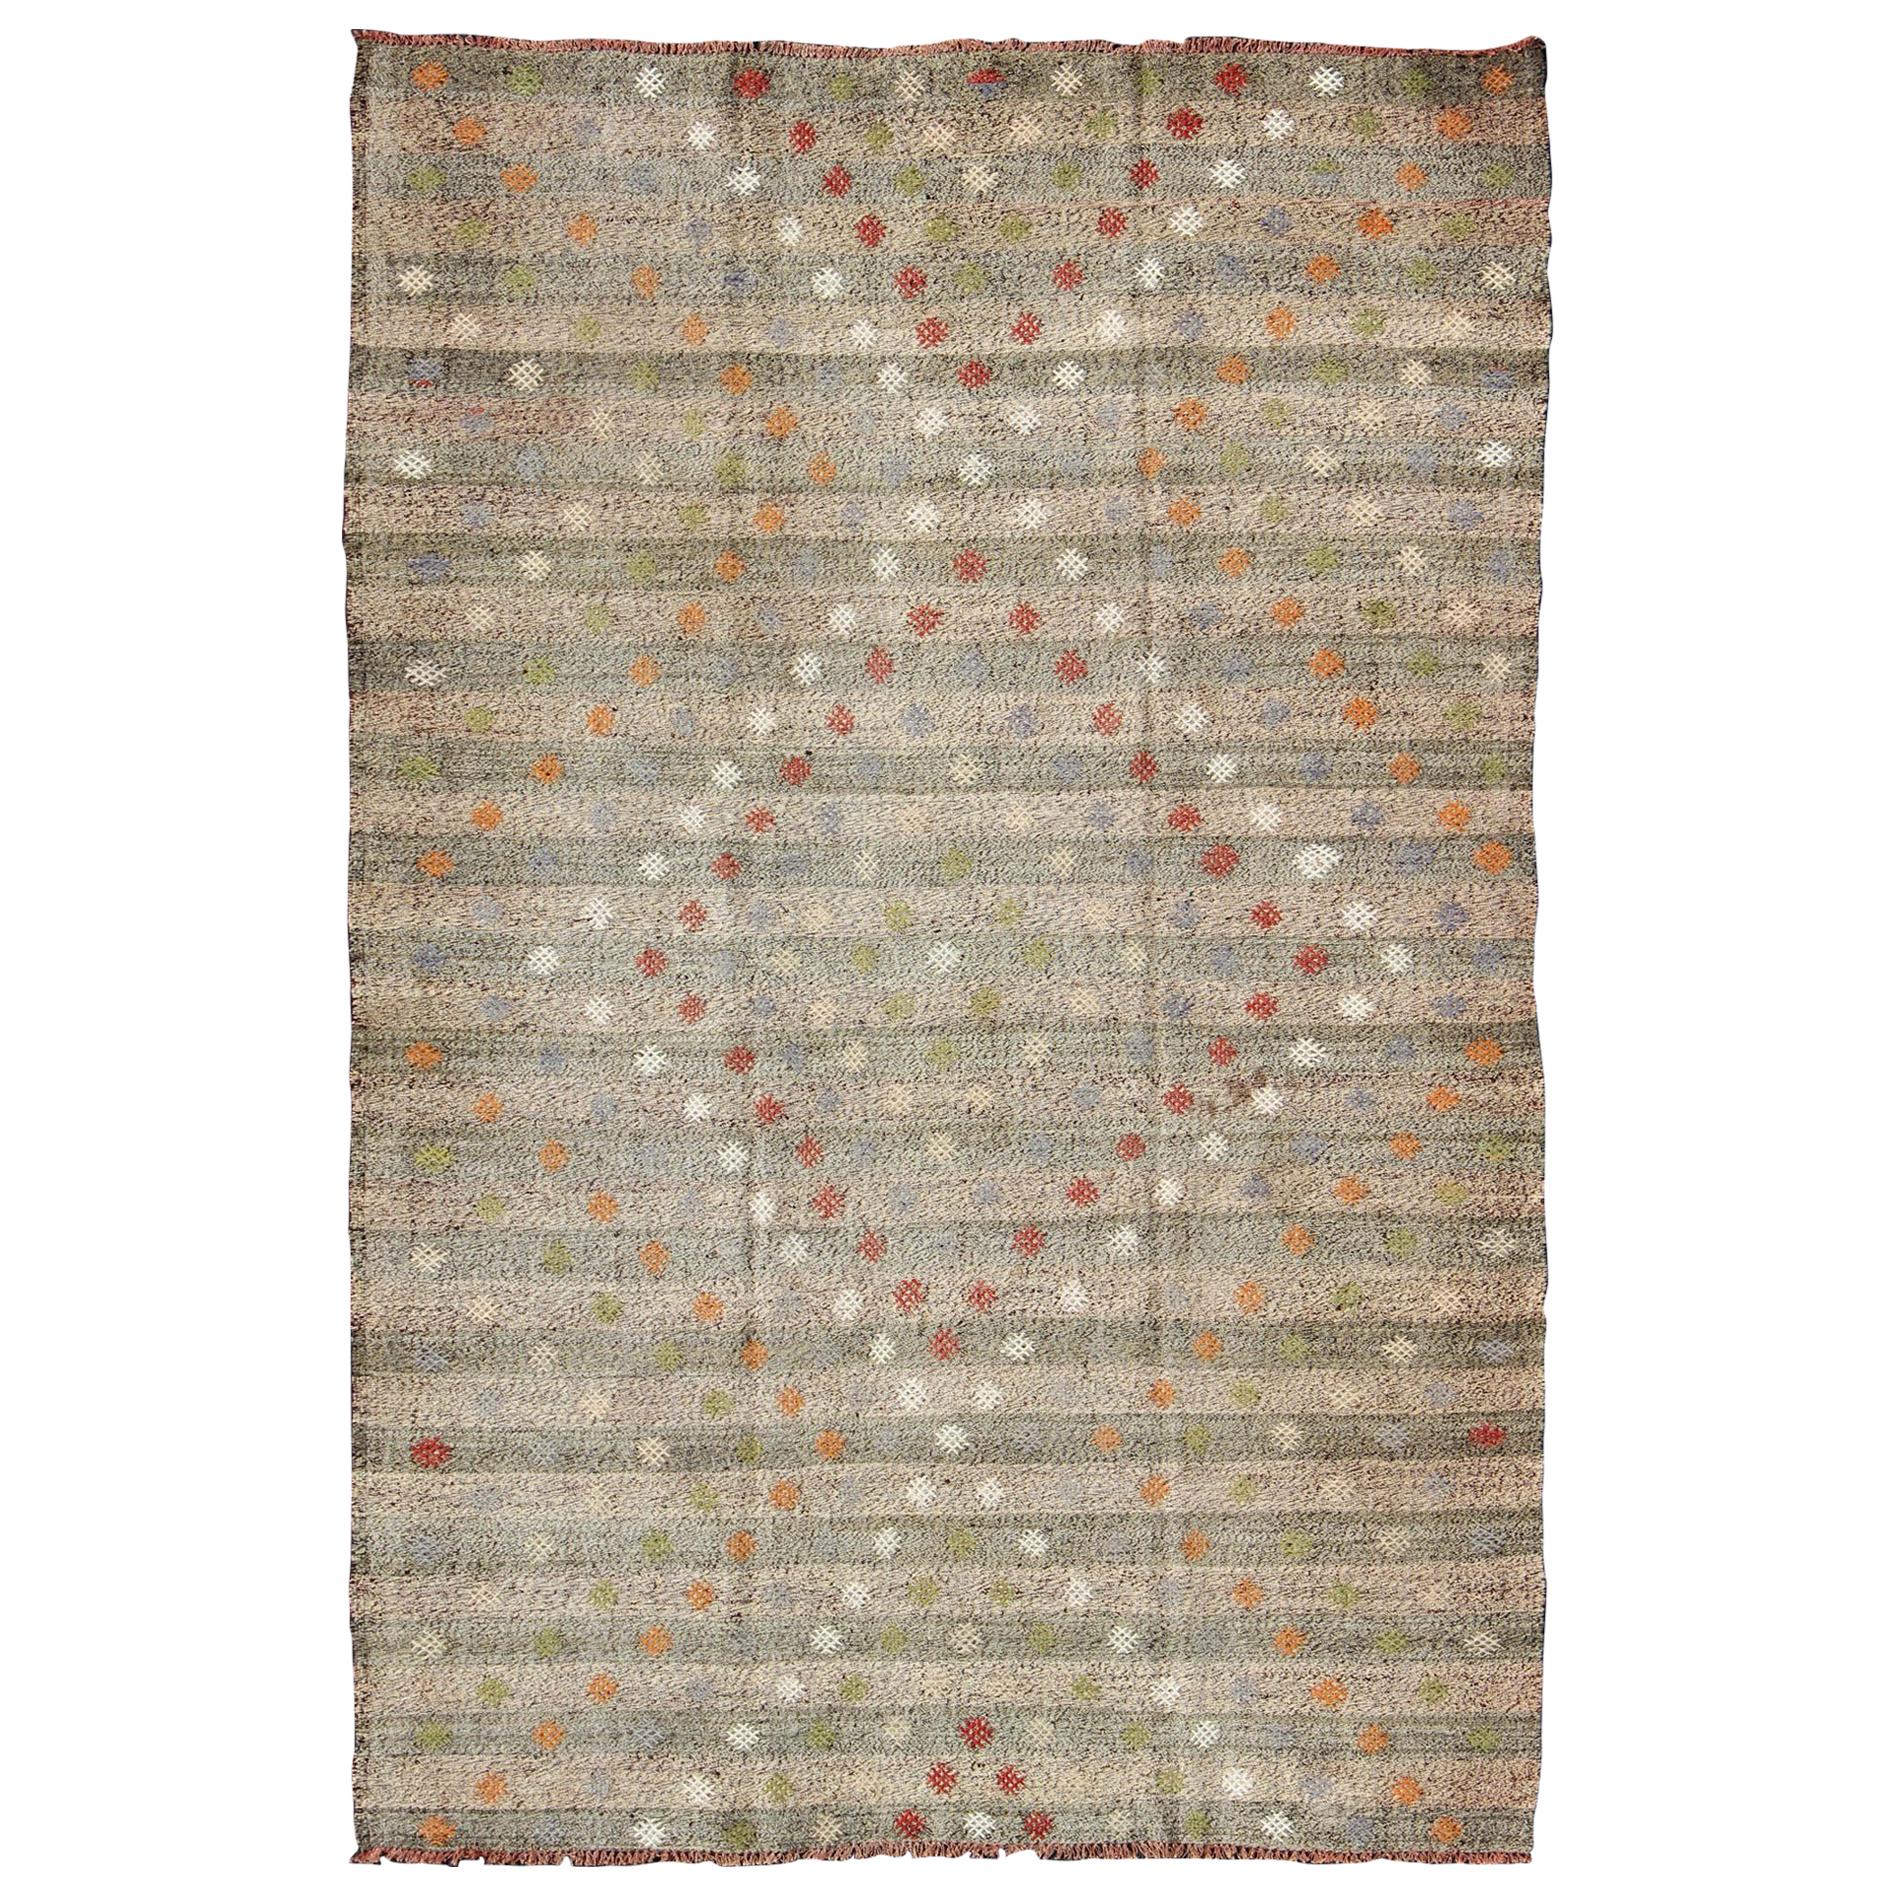 Vintage Kilim Rug from Turkey with All-Over Diamond Pattern